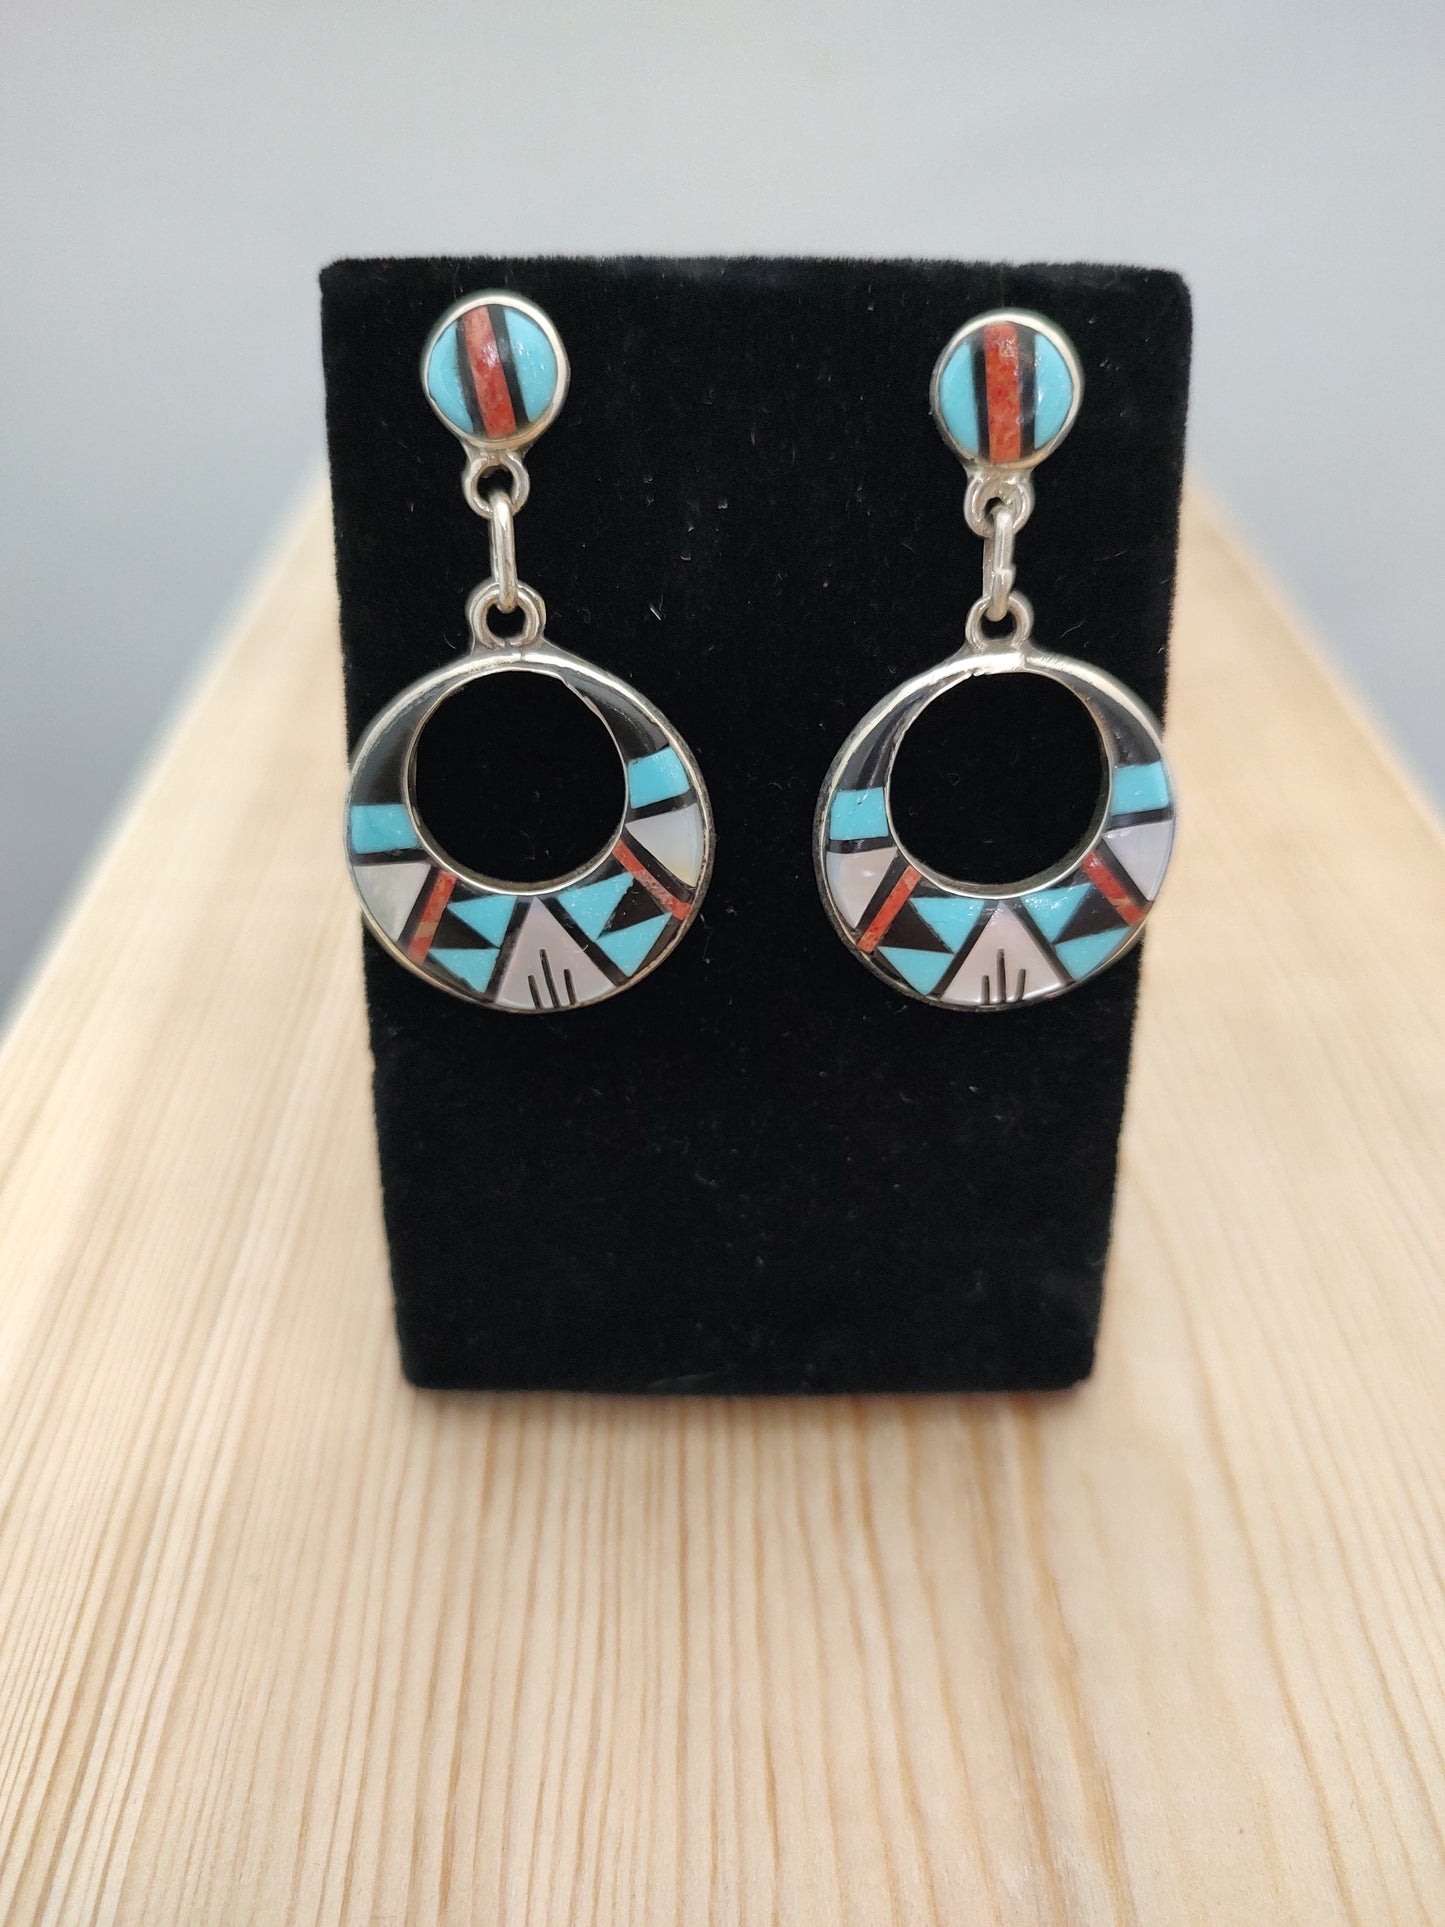 Mother of Pearl, Coral, Black Jet, and Turquoise Inlay in Dangle Post Earrings